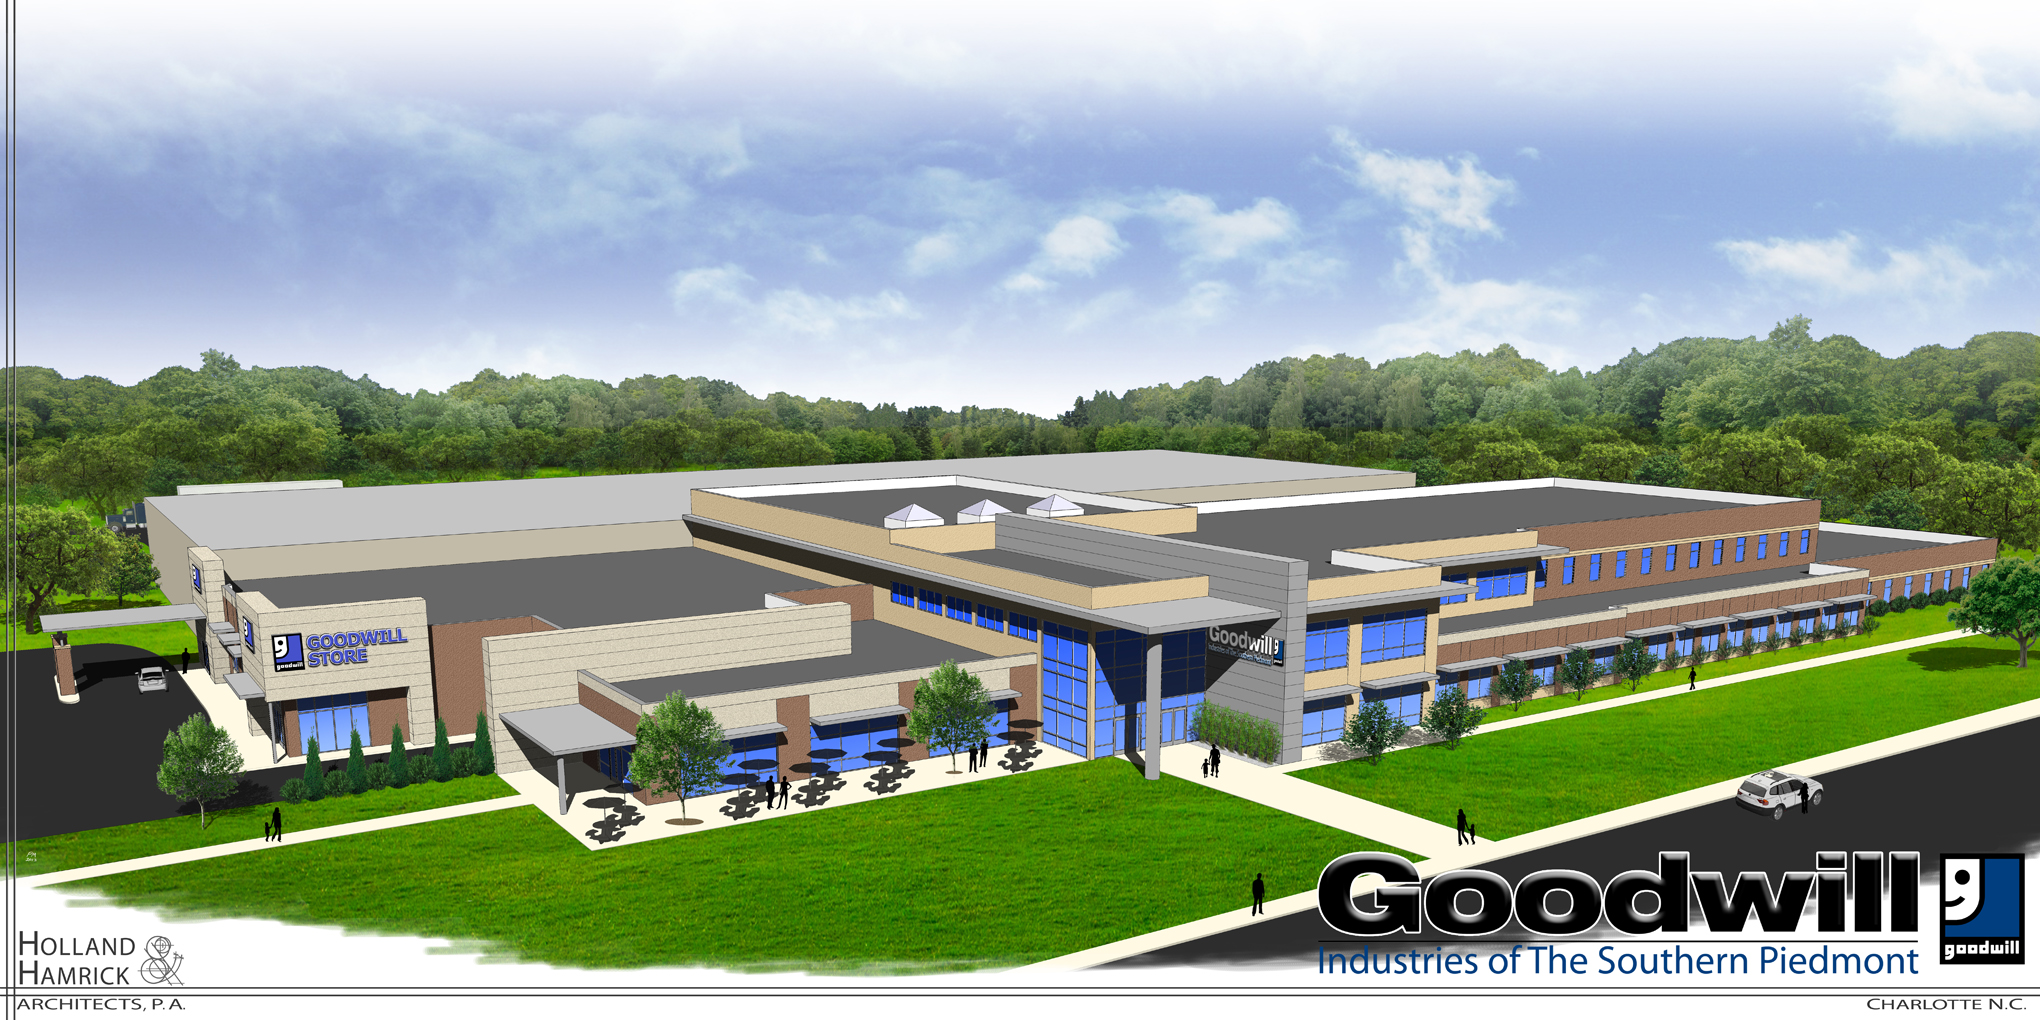 rendering of Goodwill Campus on Wilkinson Blvd, Charlotte, NC